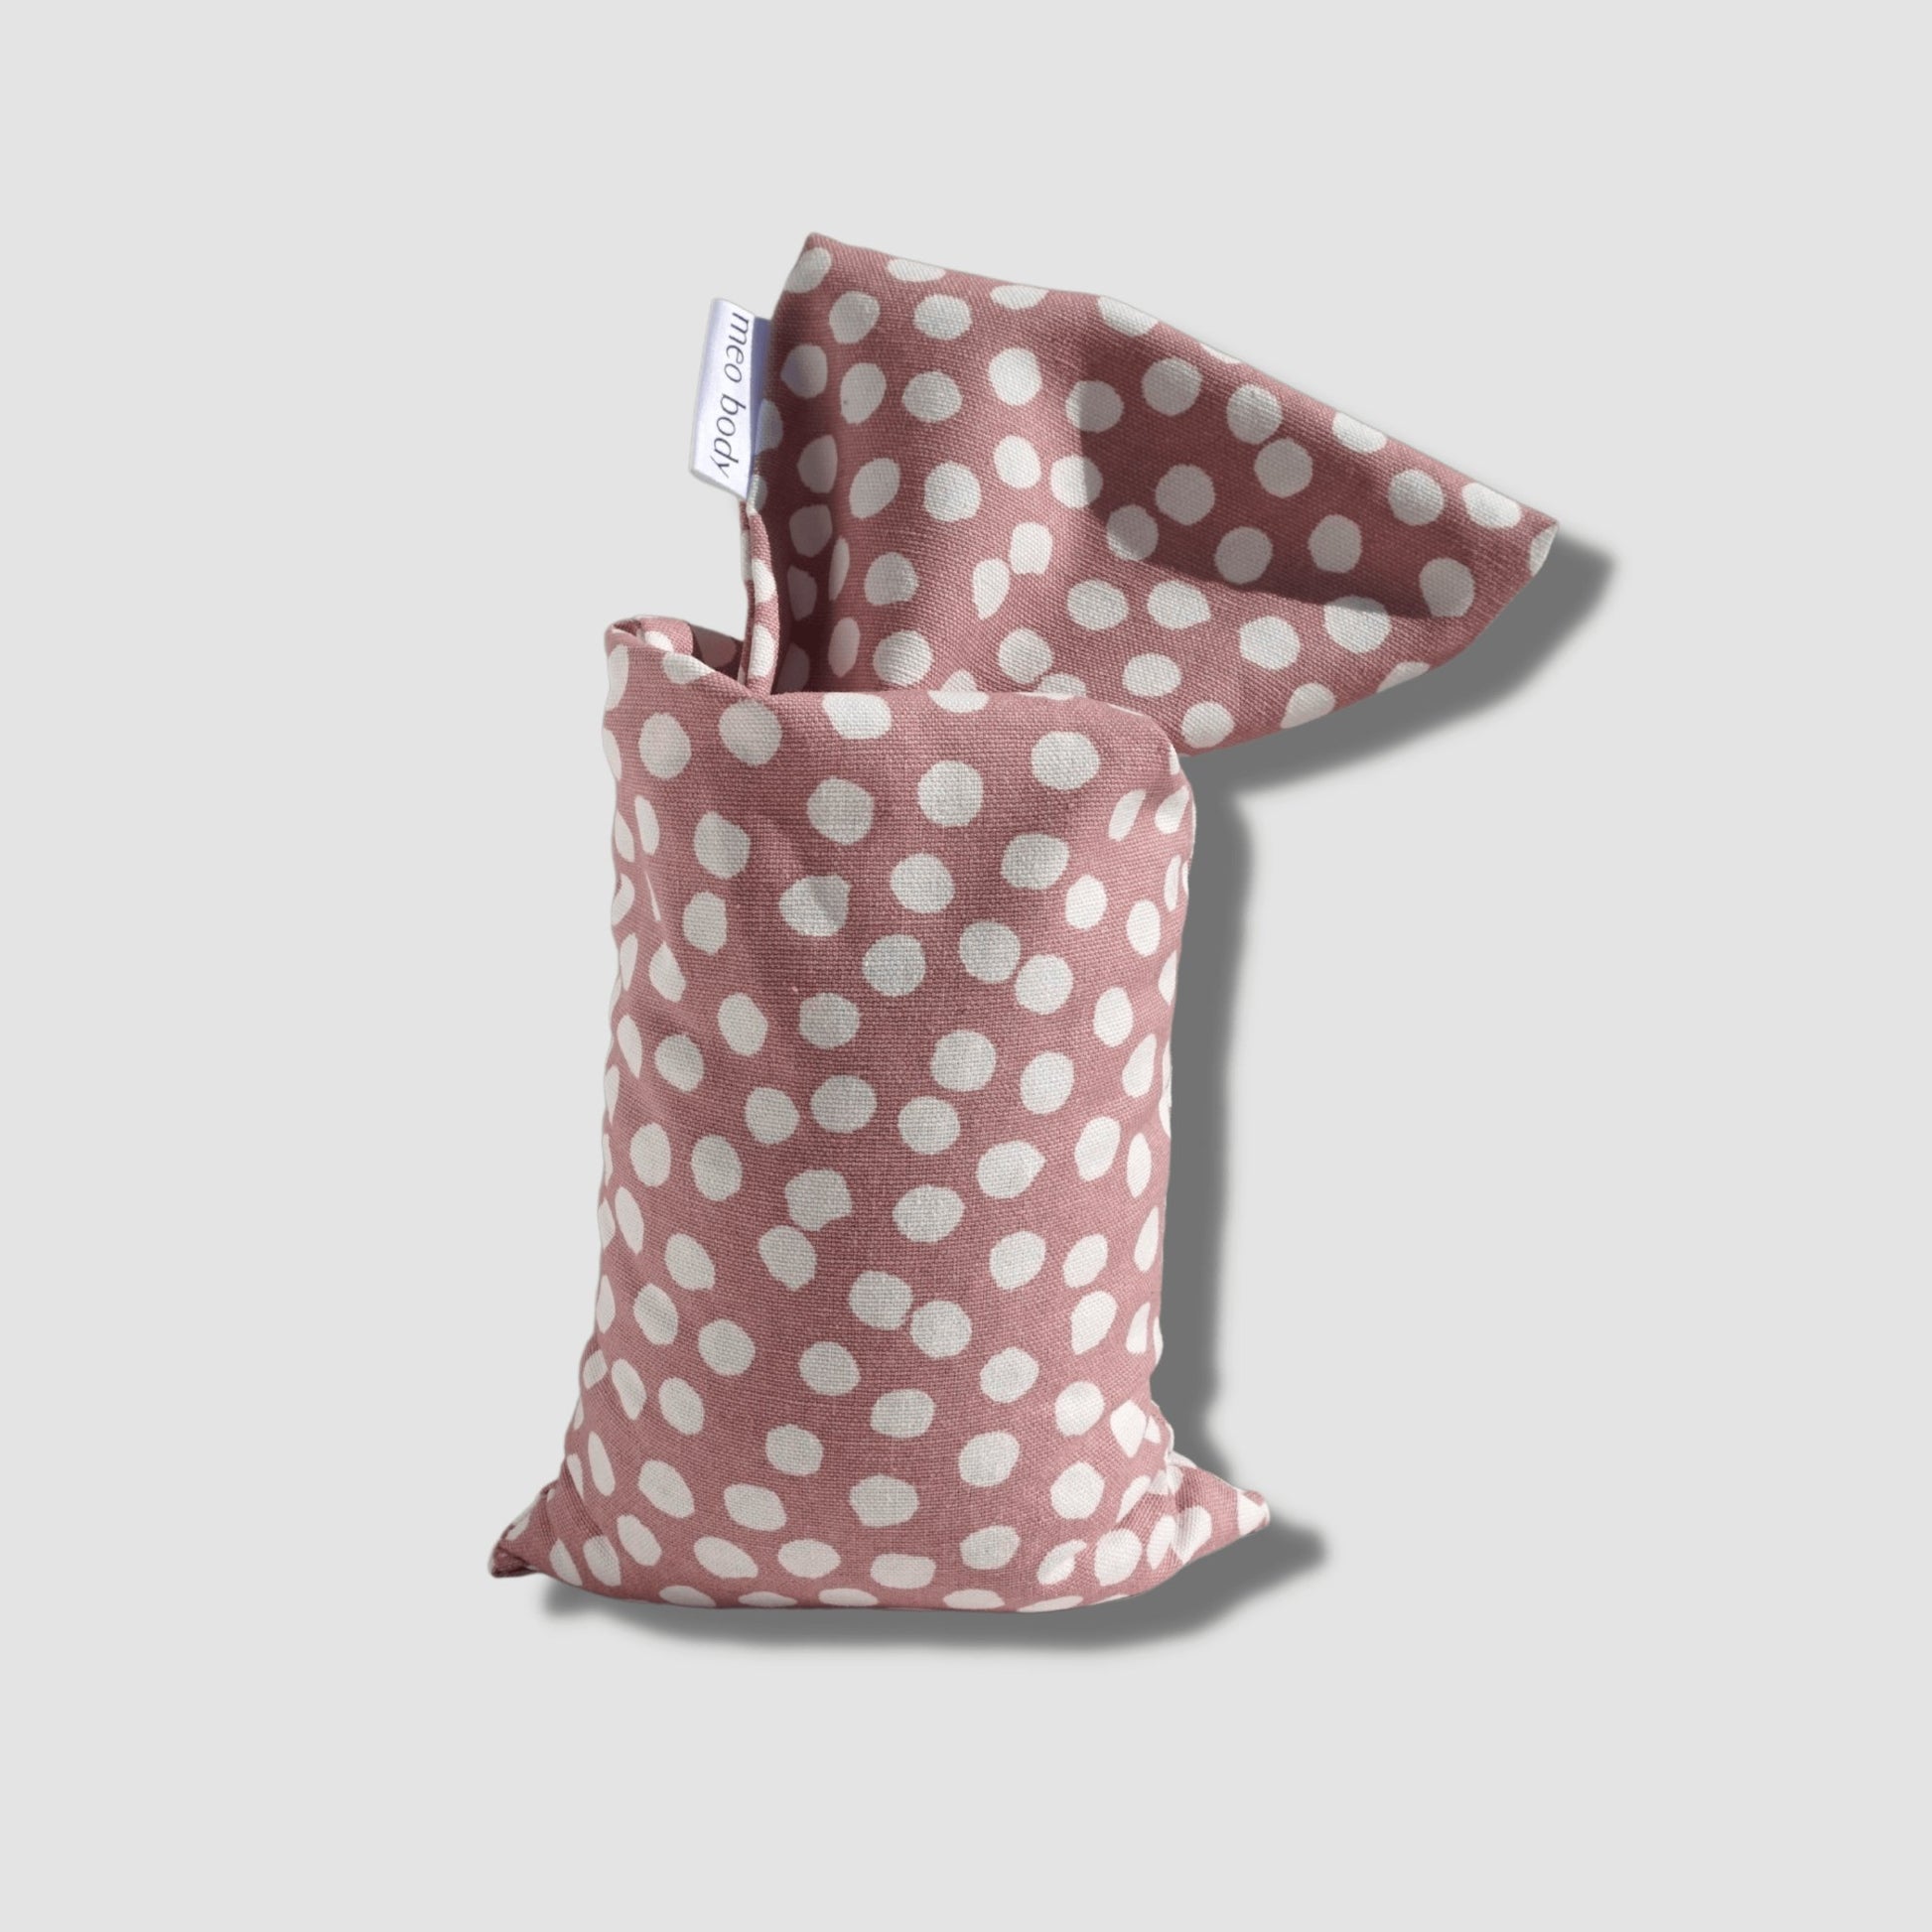 Hand-crafted Wheat Heat Pack, 'Pink and White Polka Dots' design - Meo Body